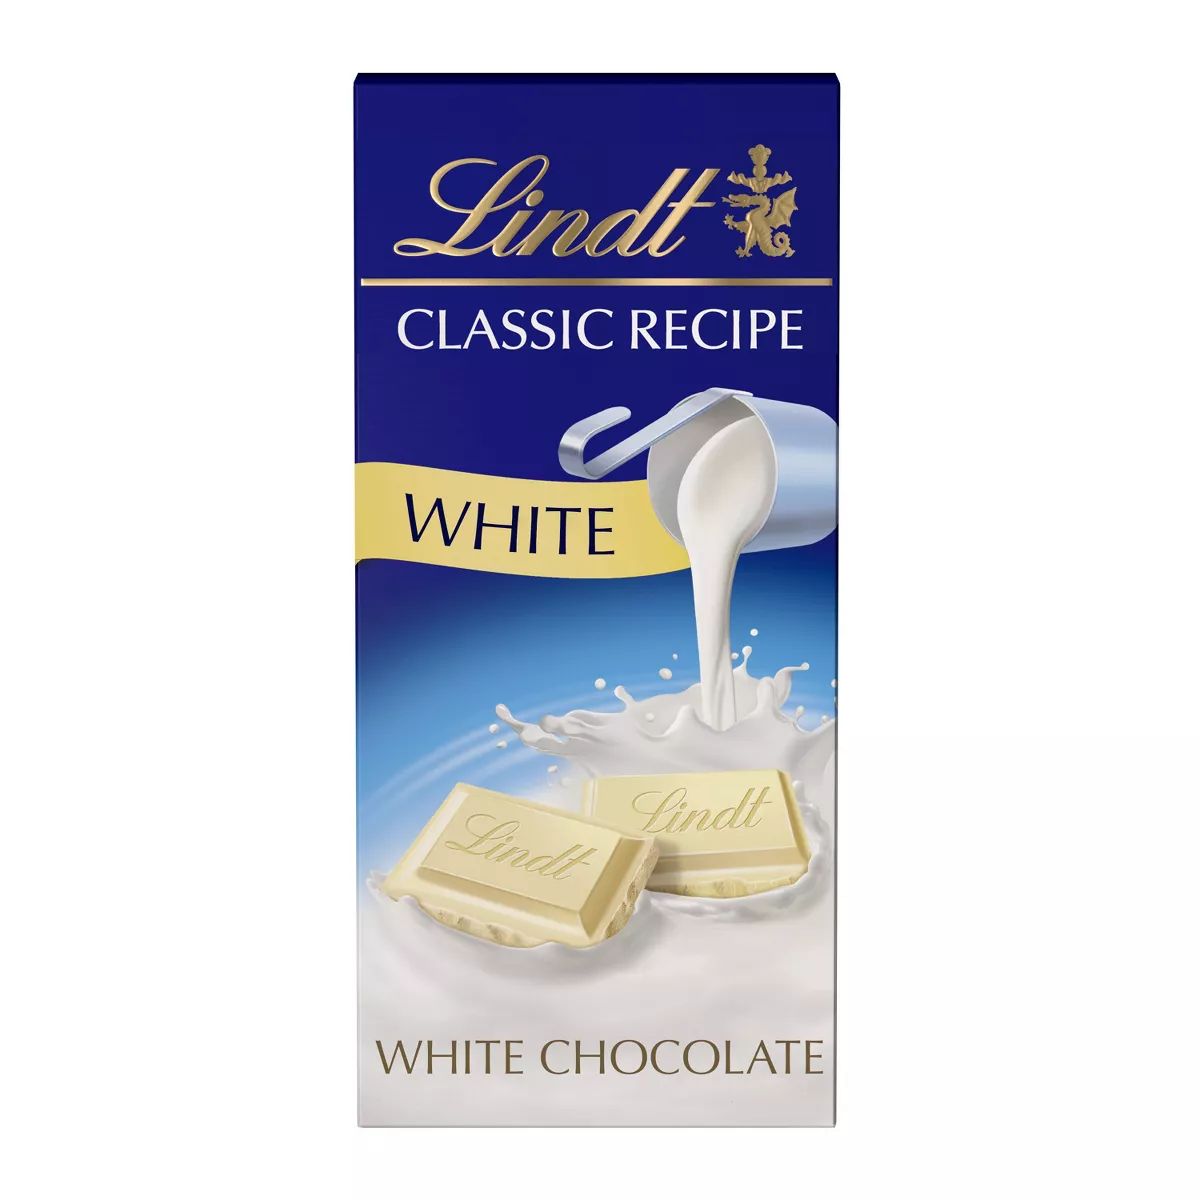 Lindt Classic Recipe White Chocolate Candy Bar - 4.4 oz. | Target